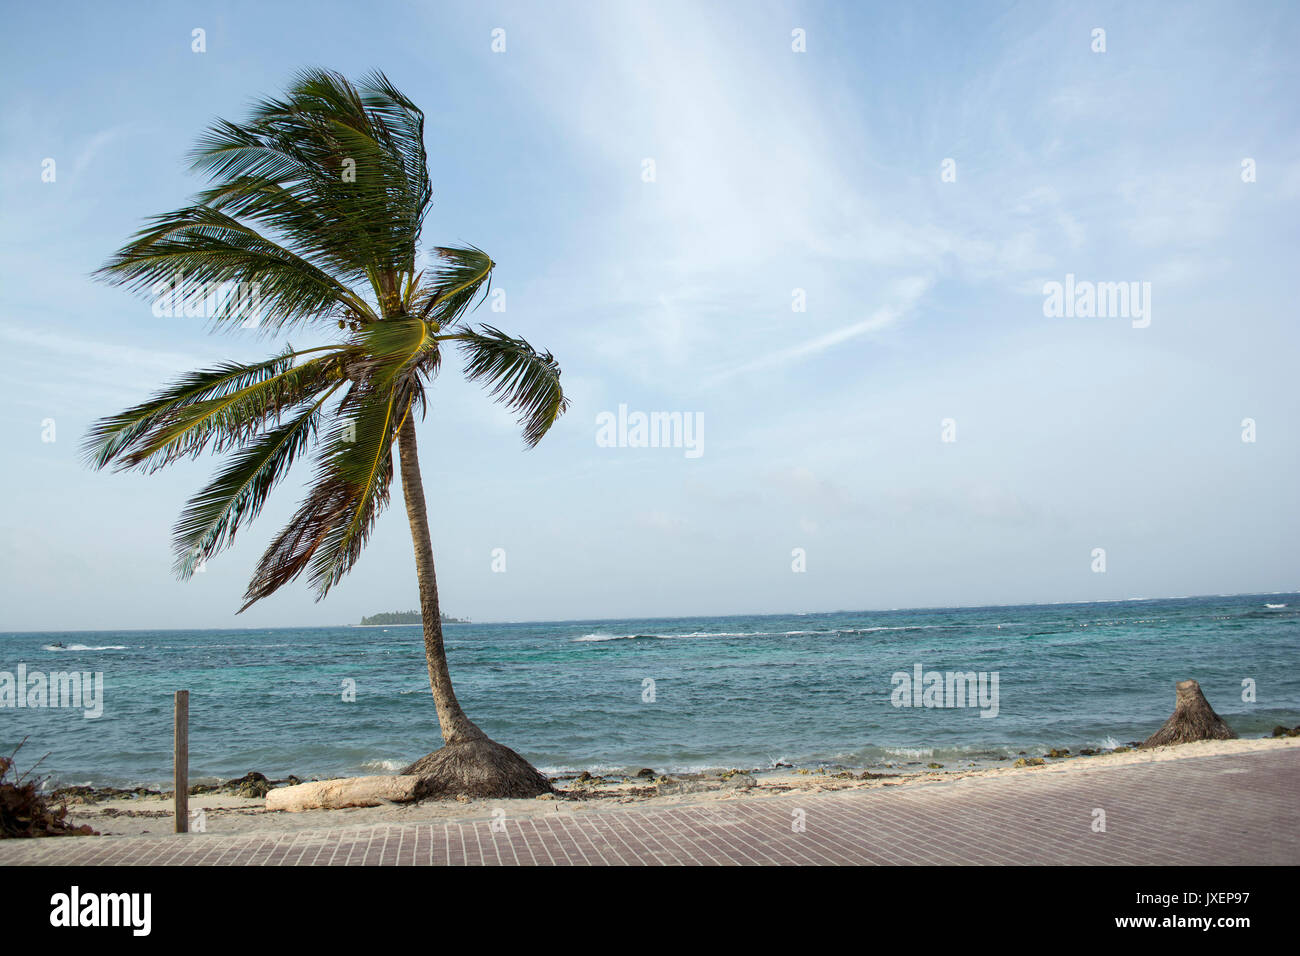 Palm tree on white sand beach front of a blue lagoon of a paradise island. Stock Photo